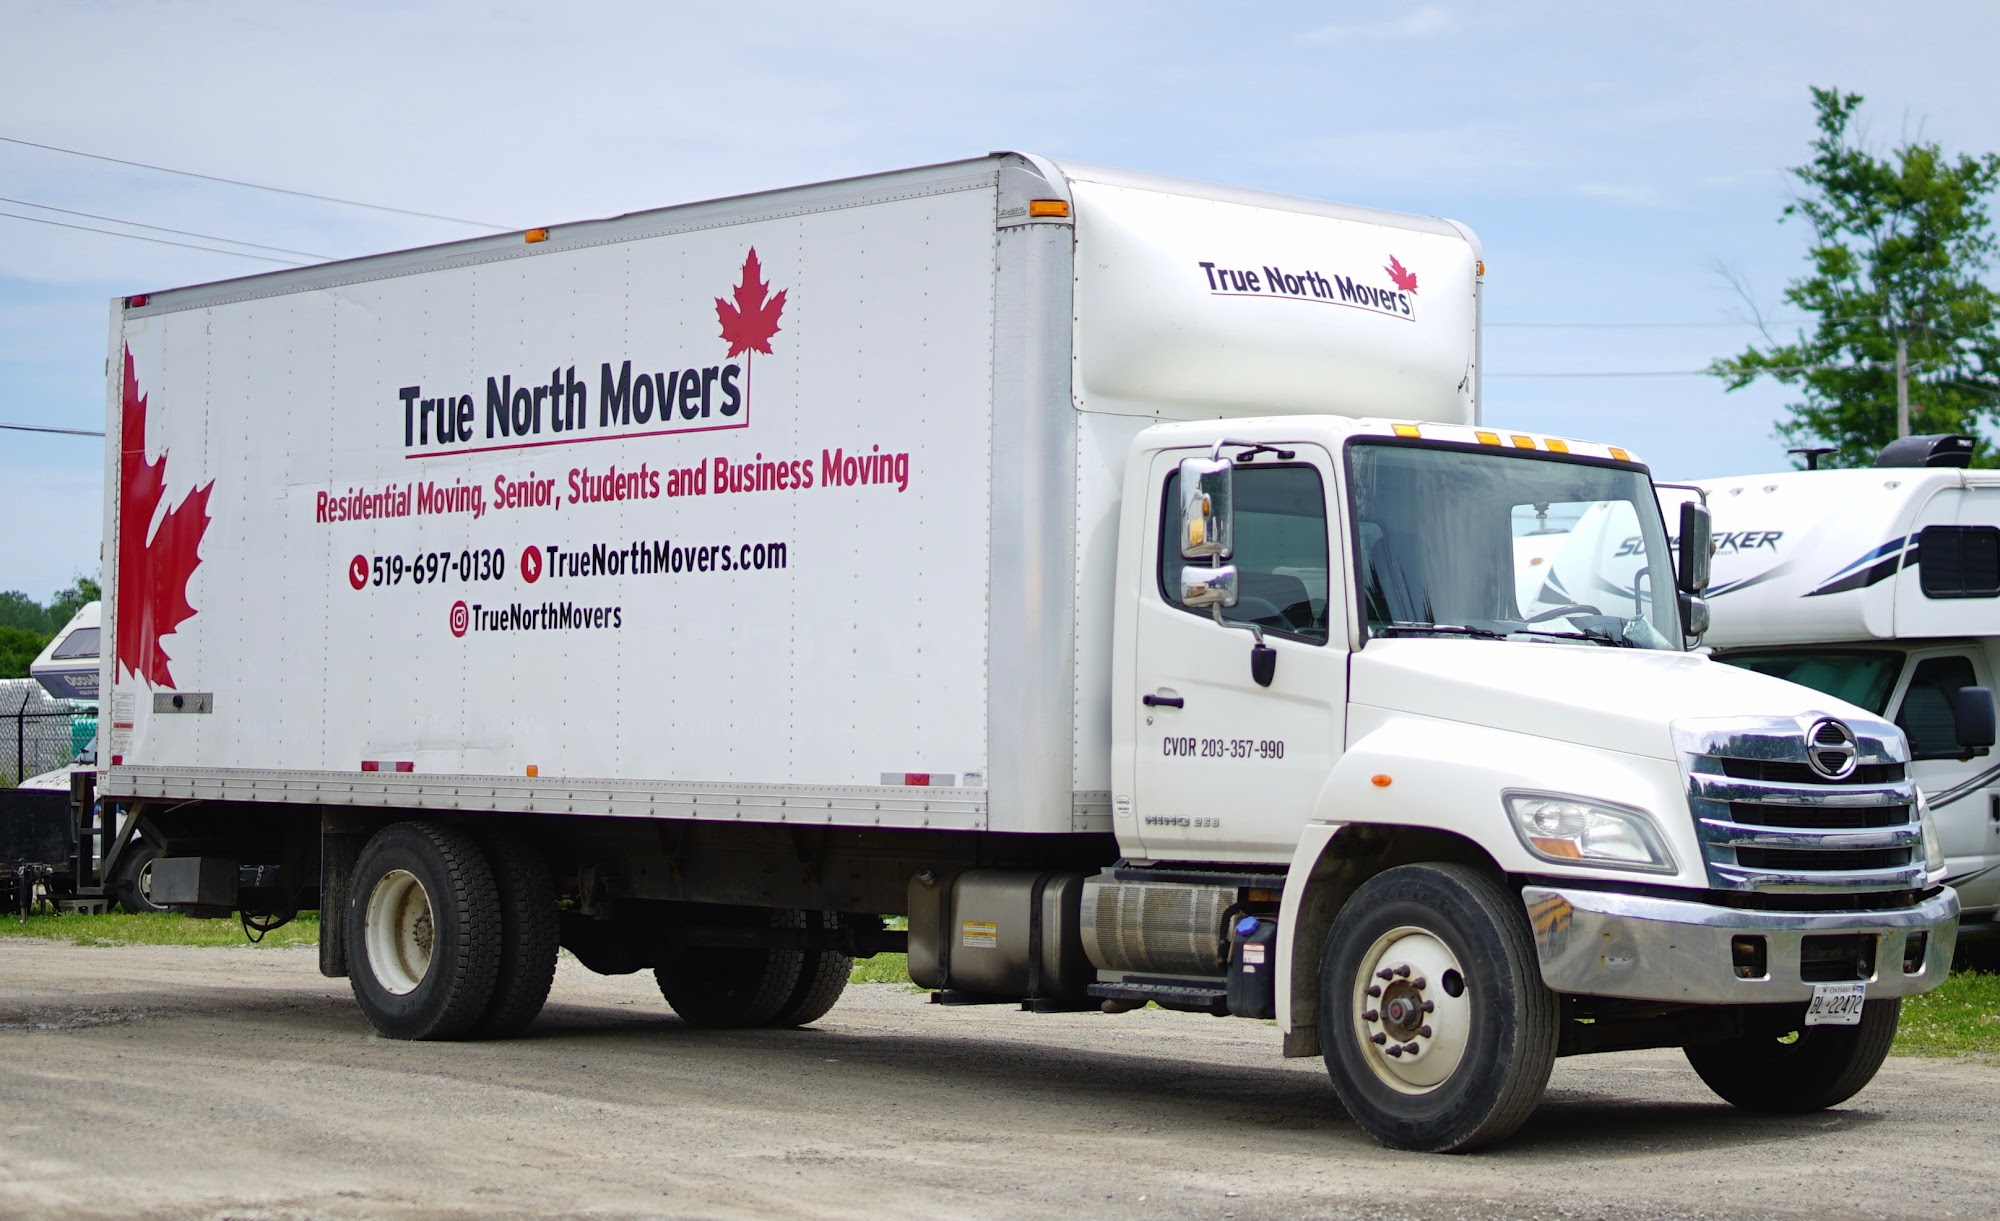 True North Movers London Ontario - Residential Moving Company